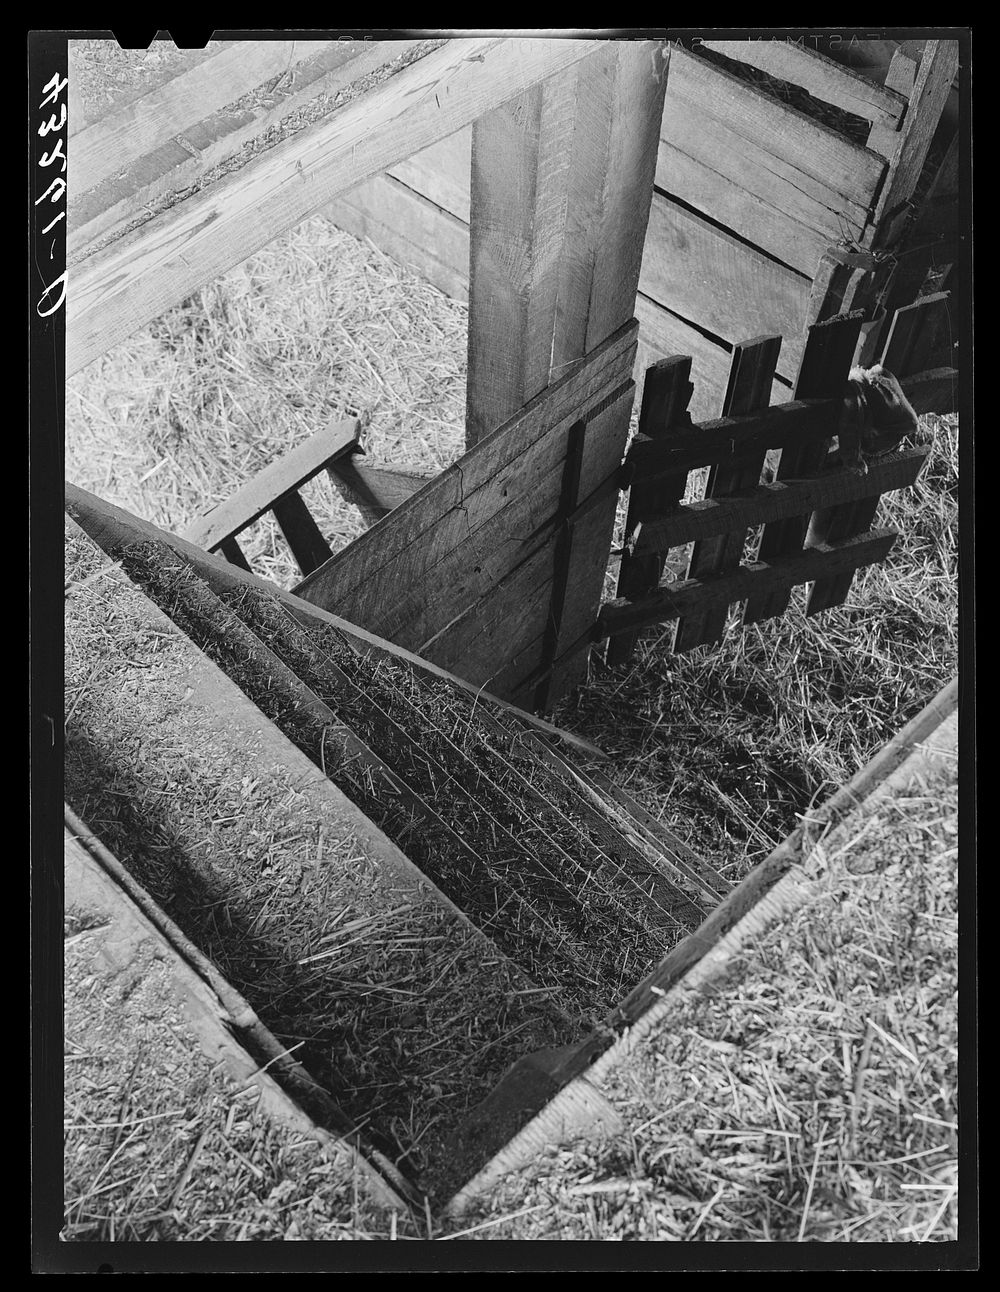 Stairs in barn. Farm near Rockville, Maryland. Sourced from the Library of Congress.